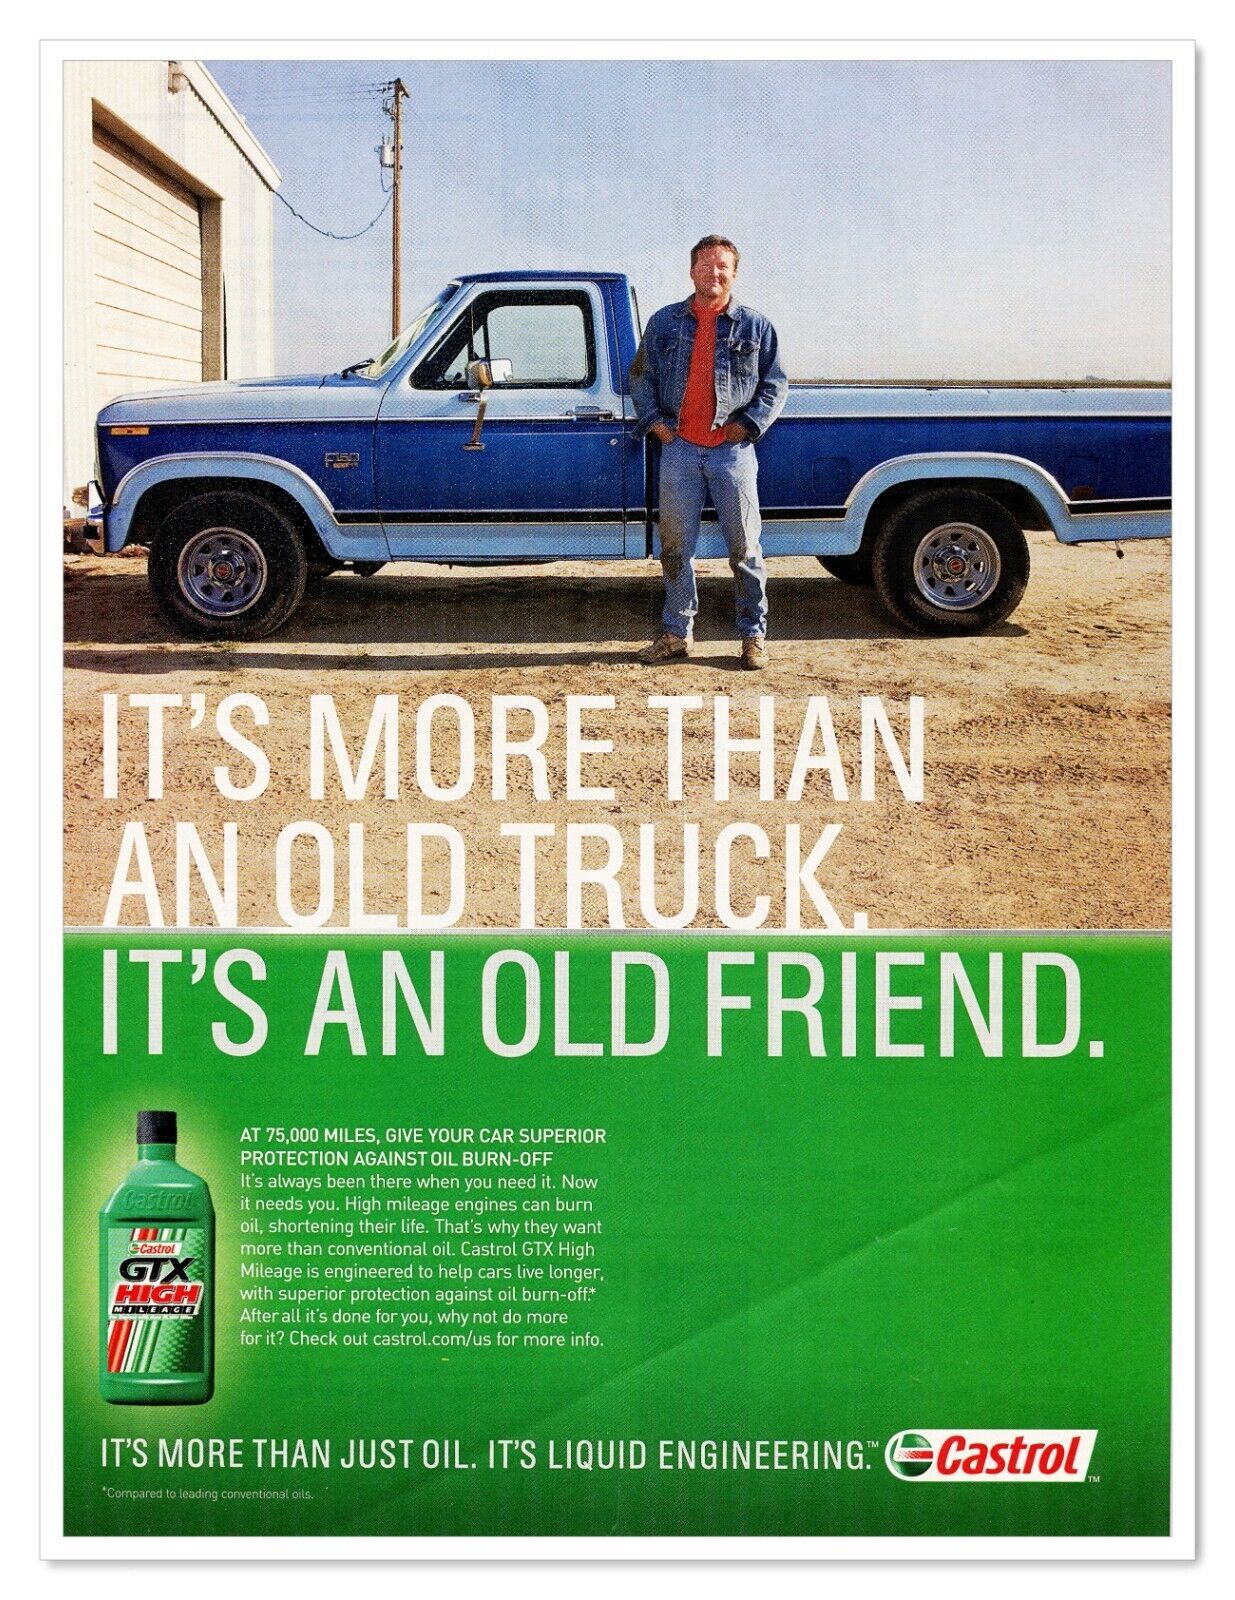 Castrol Motor Oil Ford F150 More Than a Truck 2006 Full-Page Print Magazine Ad - $9.70